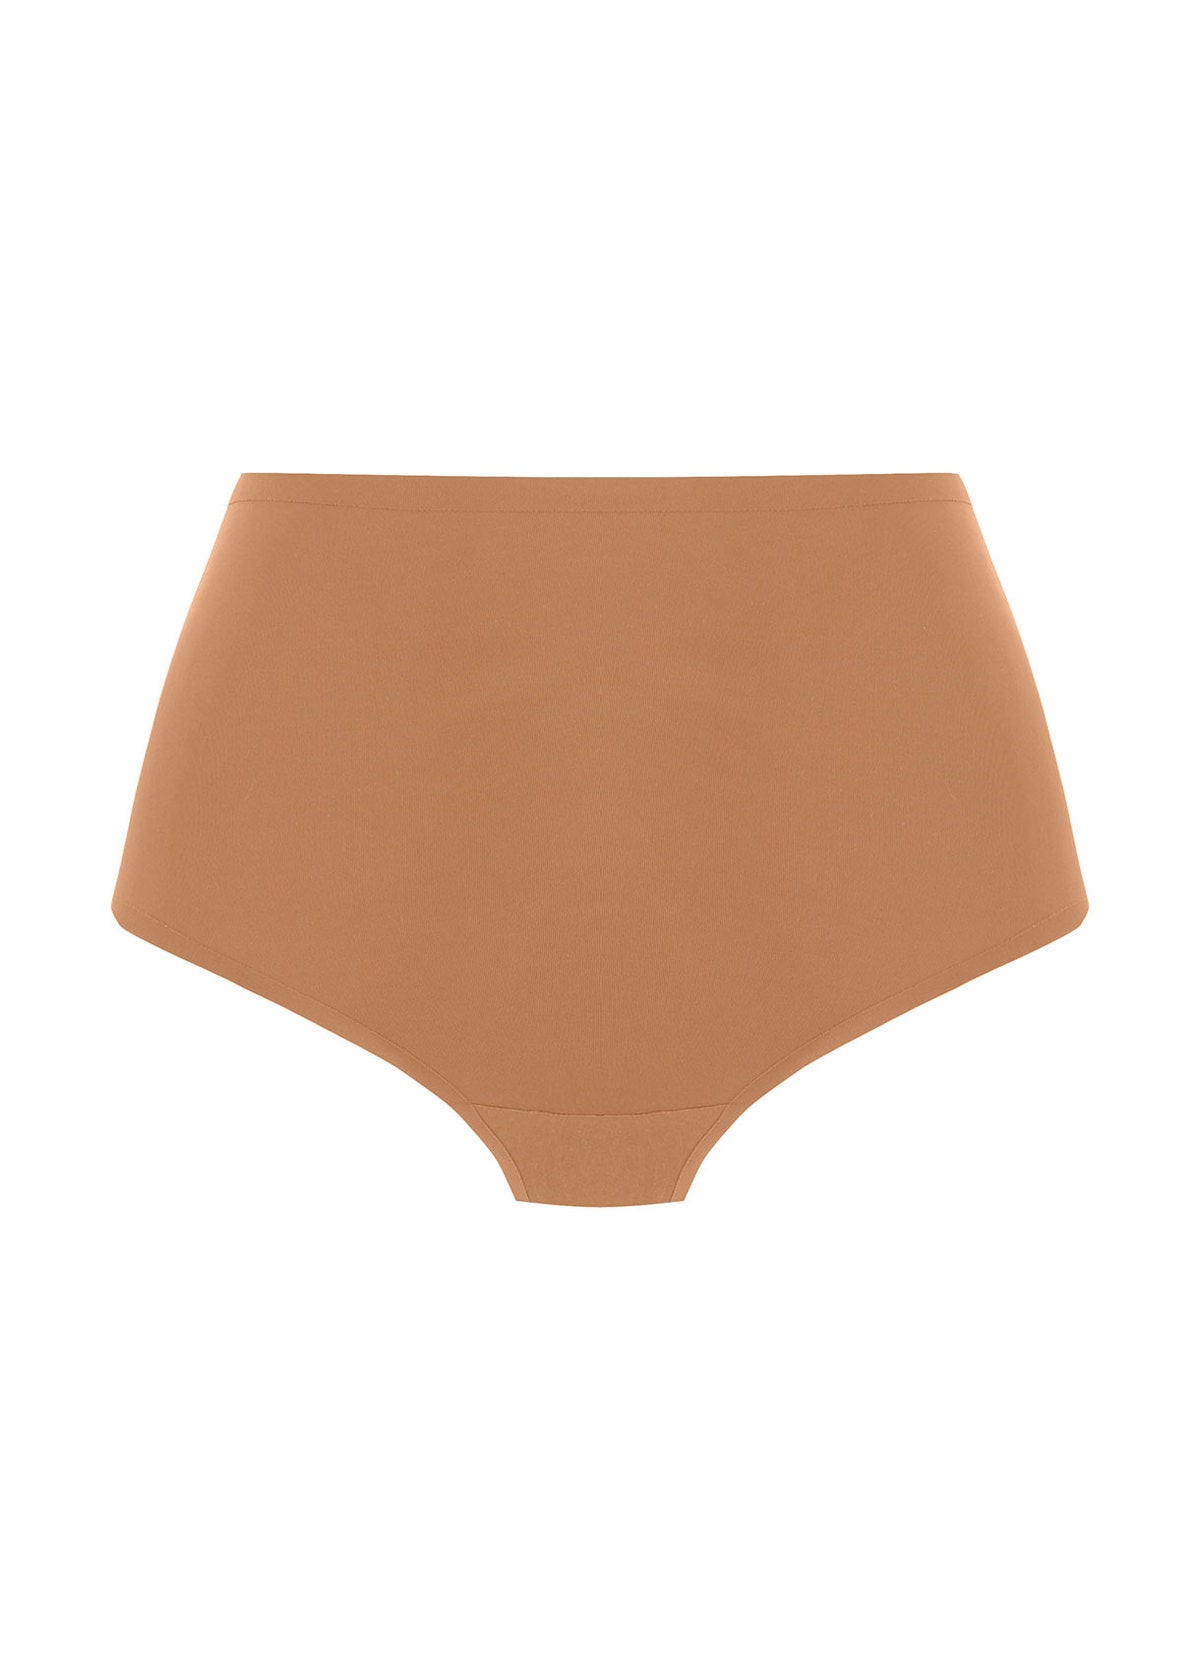 Smoothease Full Brief One Size Cinnamon front view